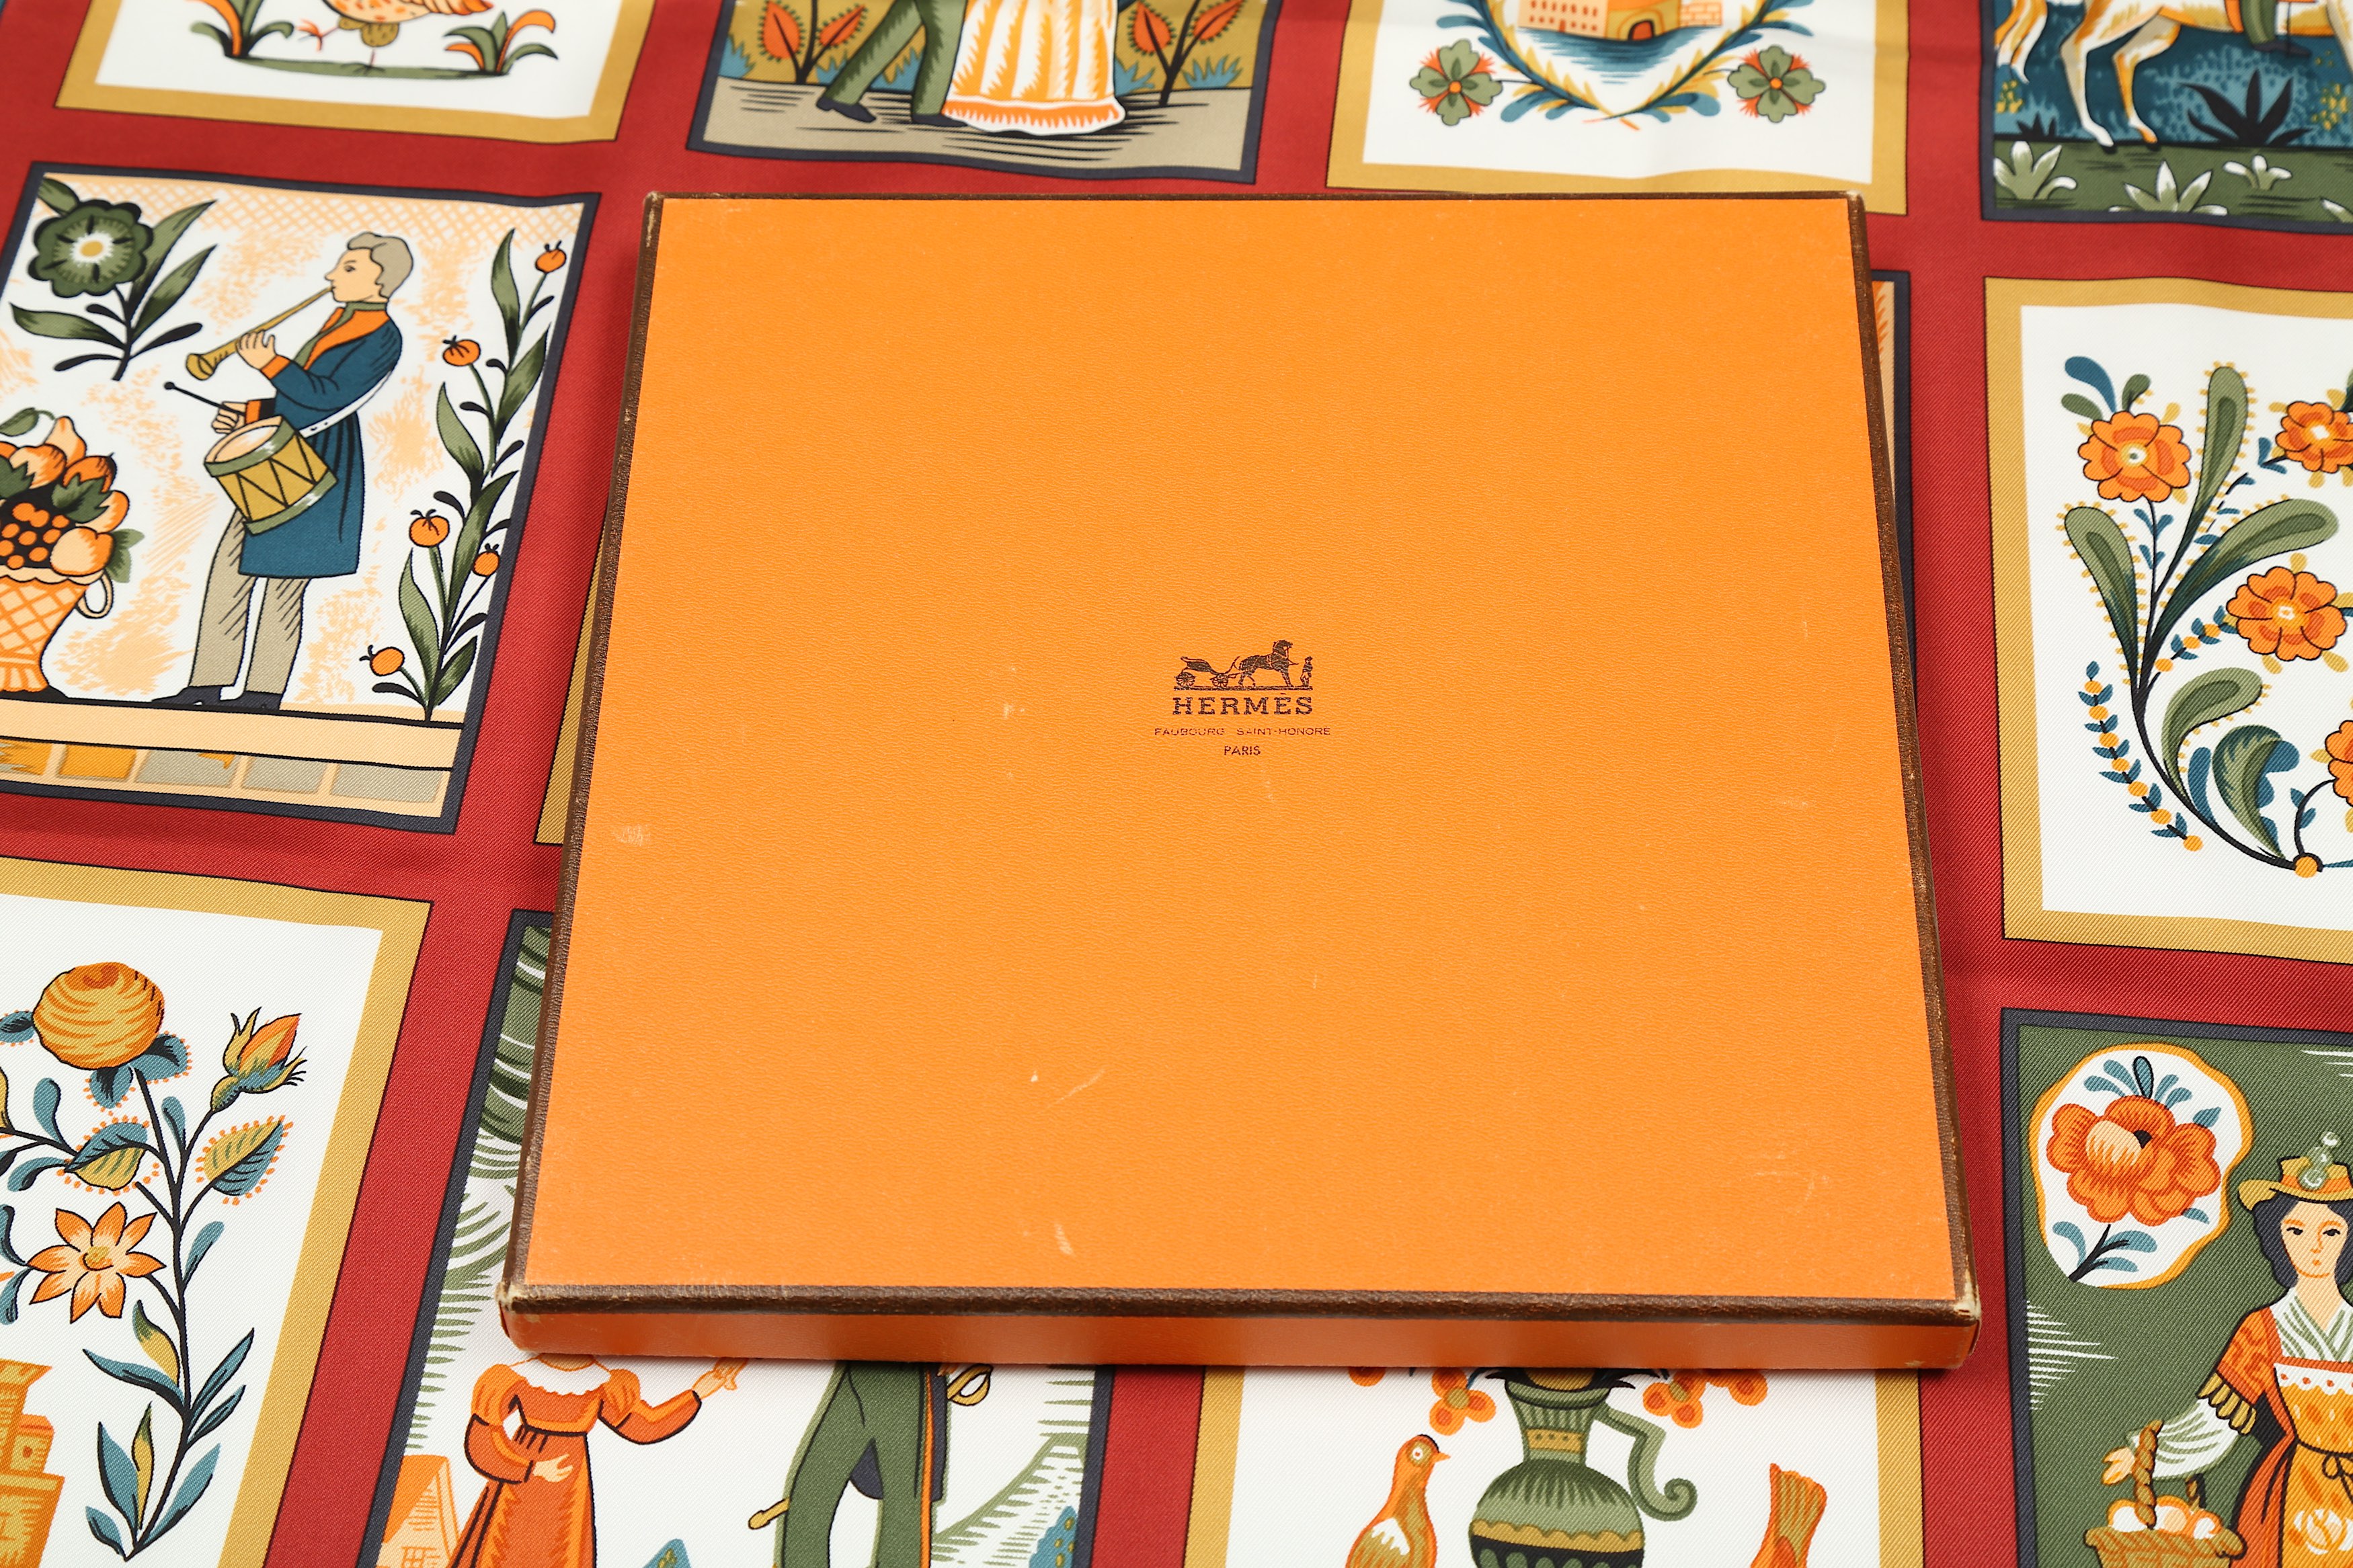 Hermes 'Imagerie' Silk Scarf - Image 4 of 4